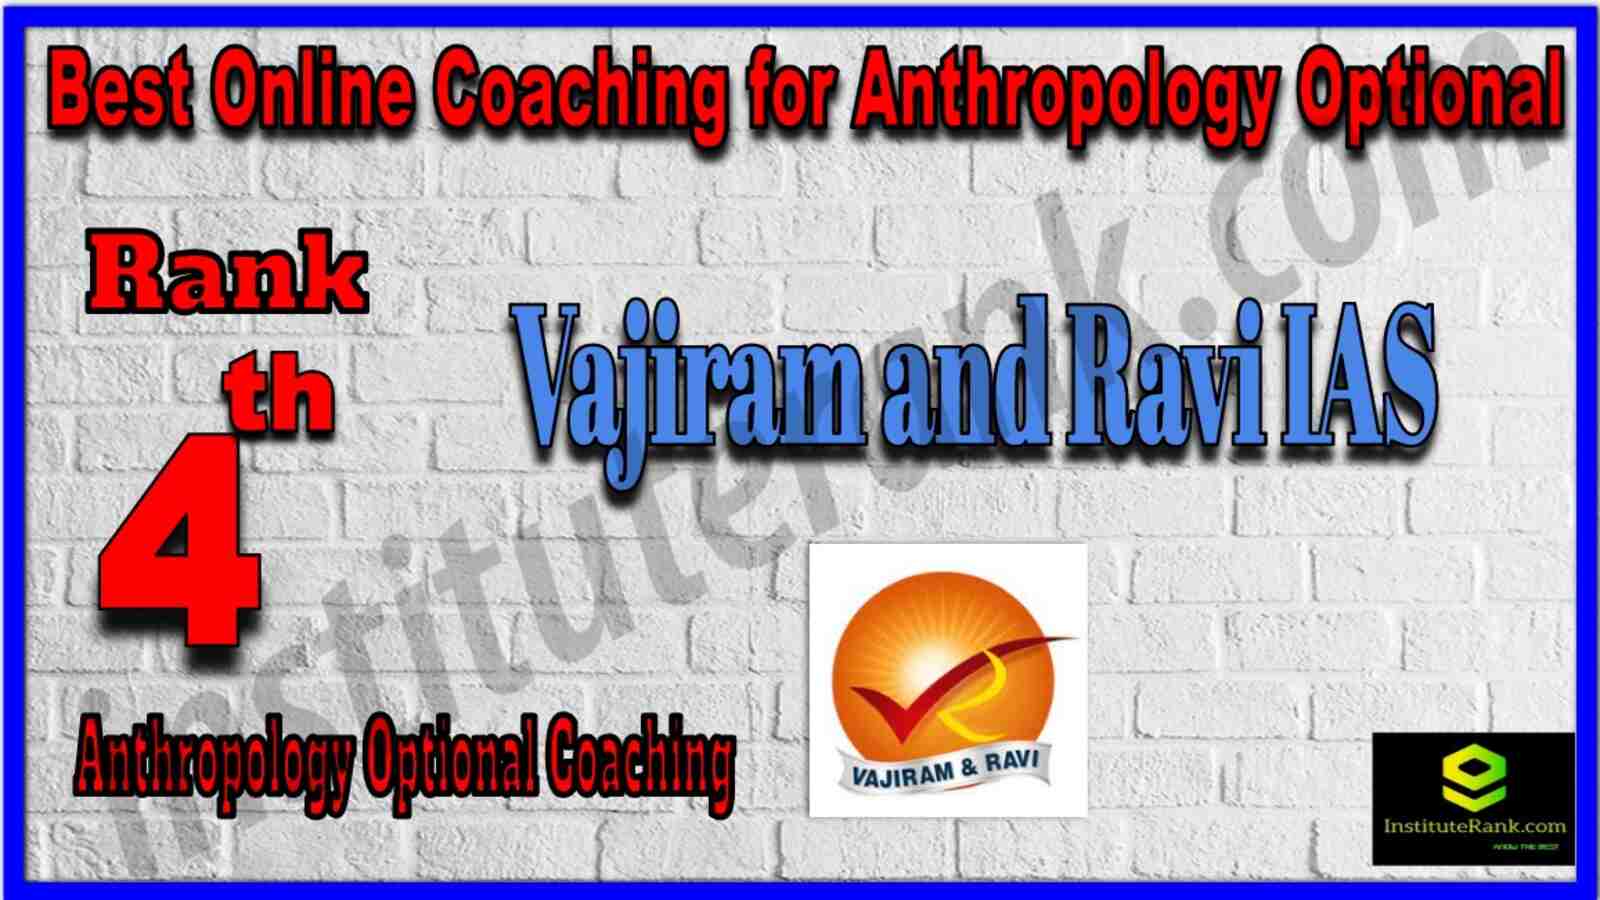 Rank 4 Best Online Coaching for Anthropology Optional